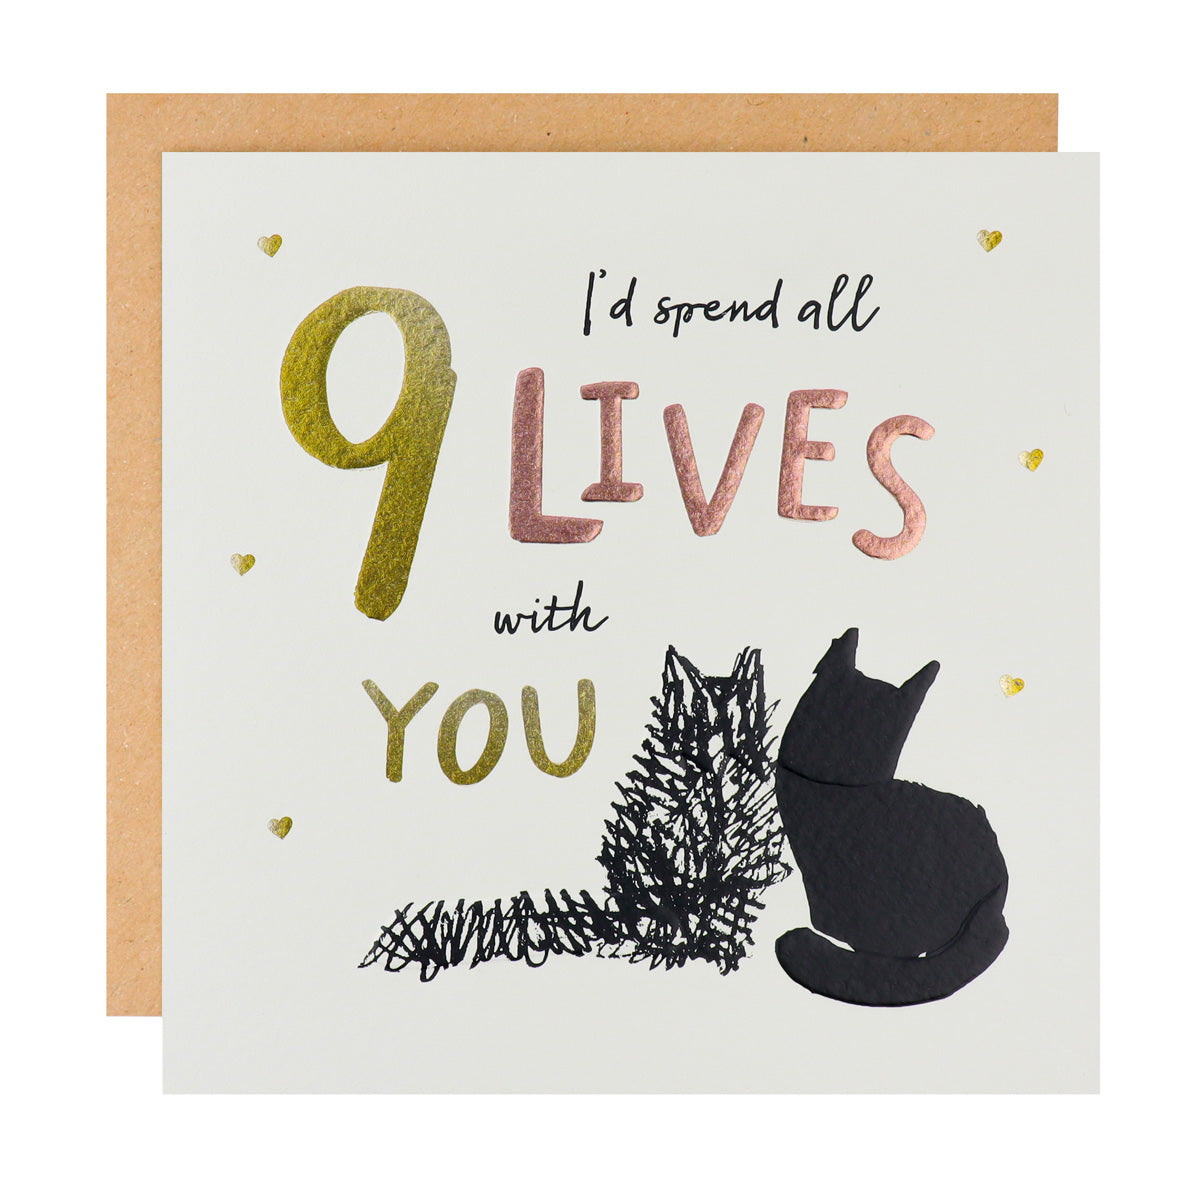 Spend All 9 Lives Battersea Cats Charity Card from Penny Black